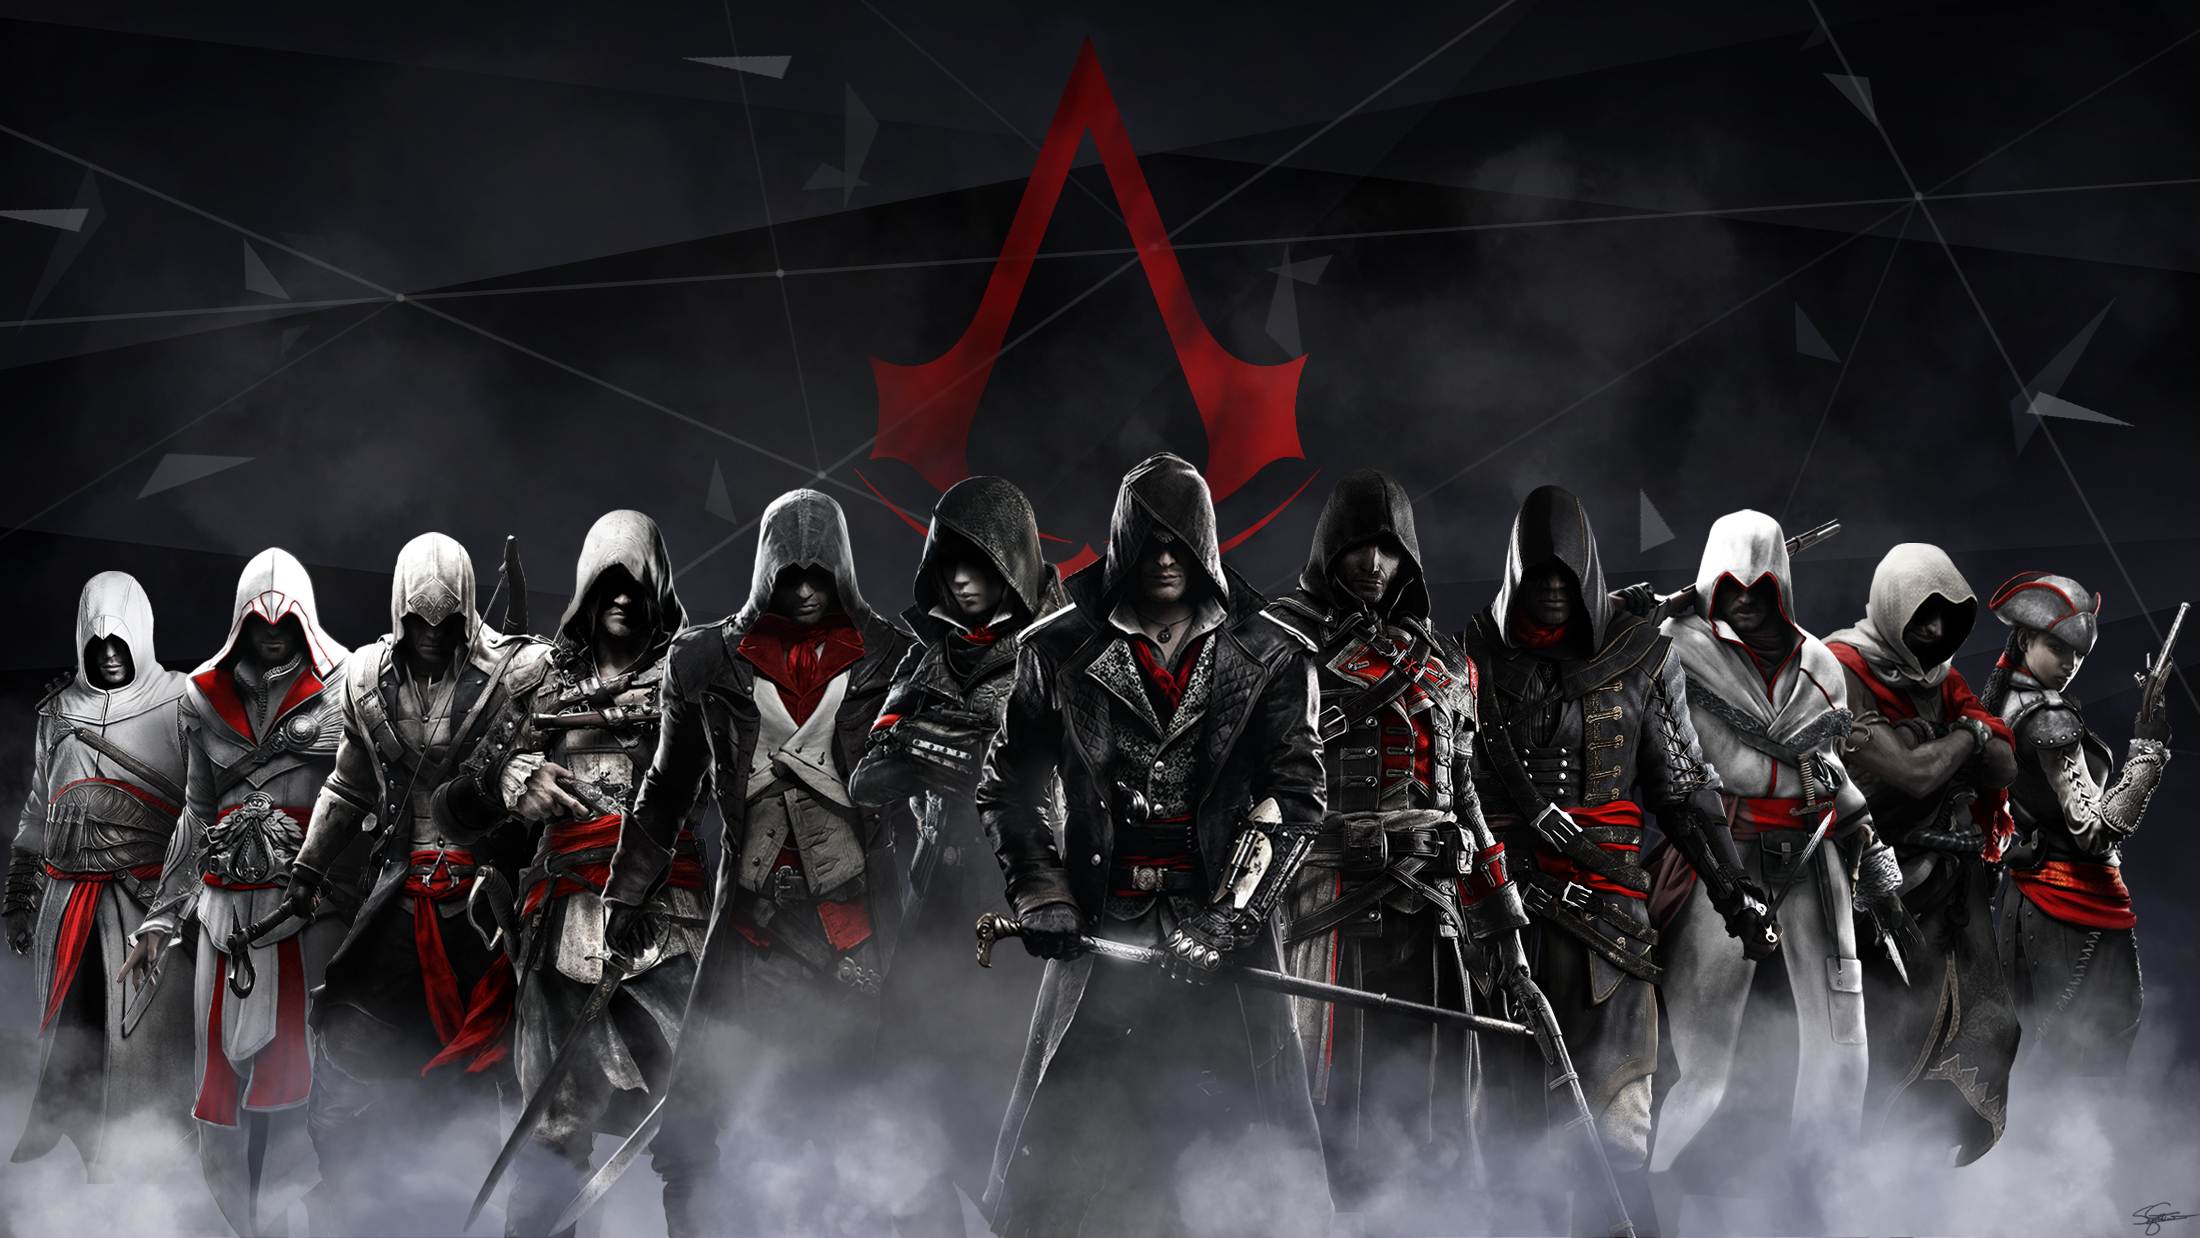 Assassin's Creed Wallpaper (Updated - Full HD) by GianlucaSorrentino on  DeviantArt